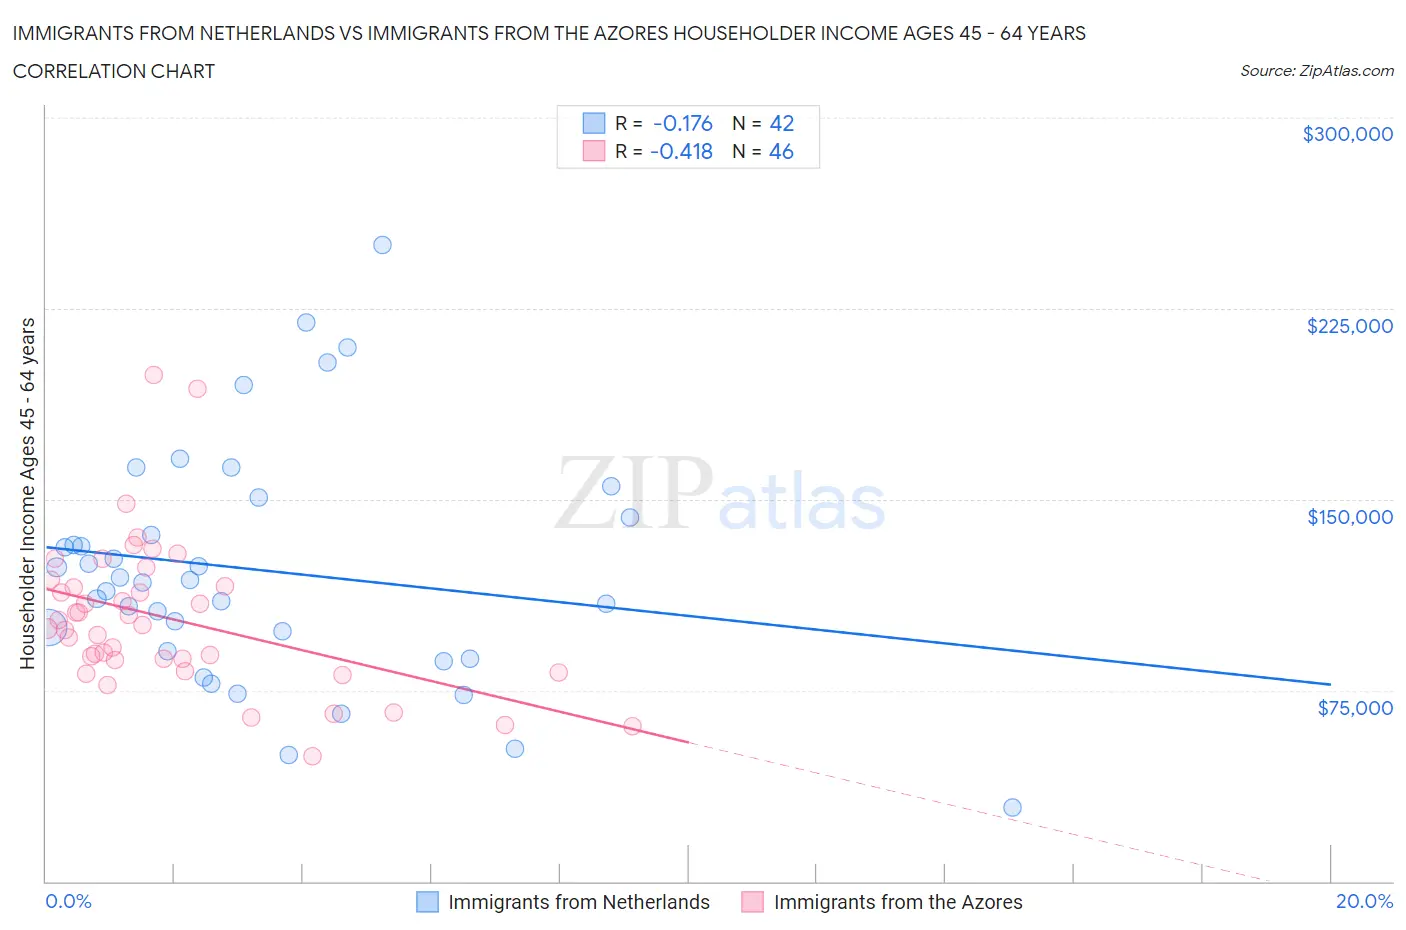 Immigrants from Netherlands vs Immigrants from the Azores Householder Income Ages 45 - 64 years